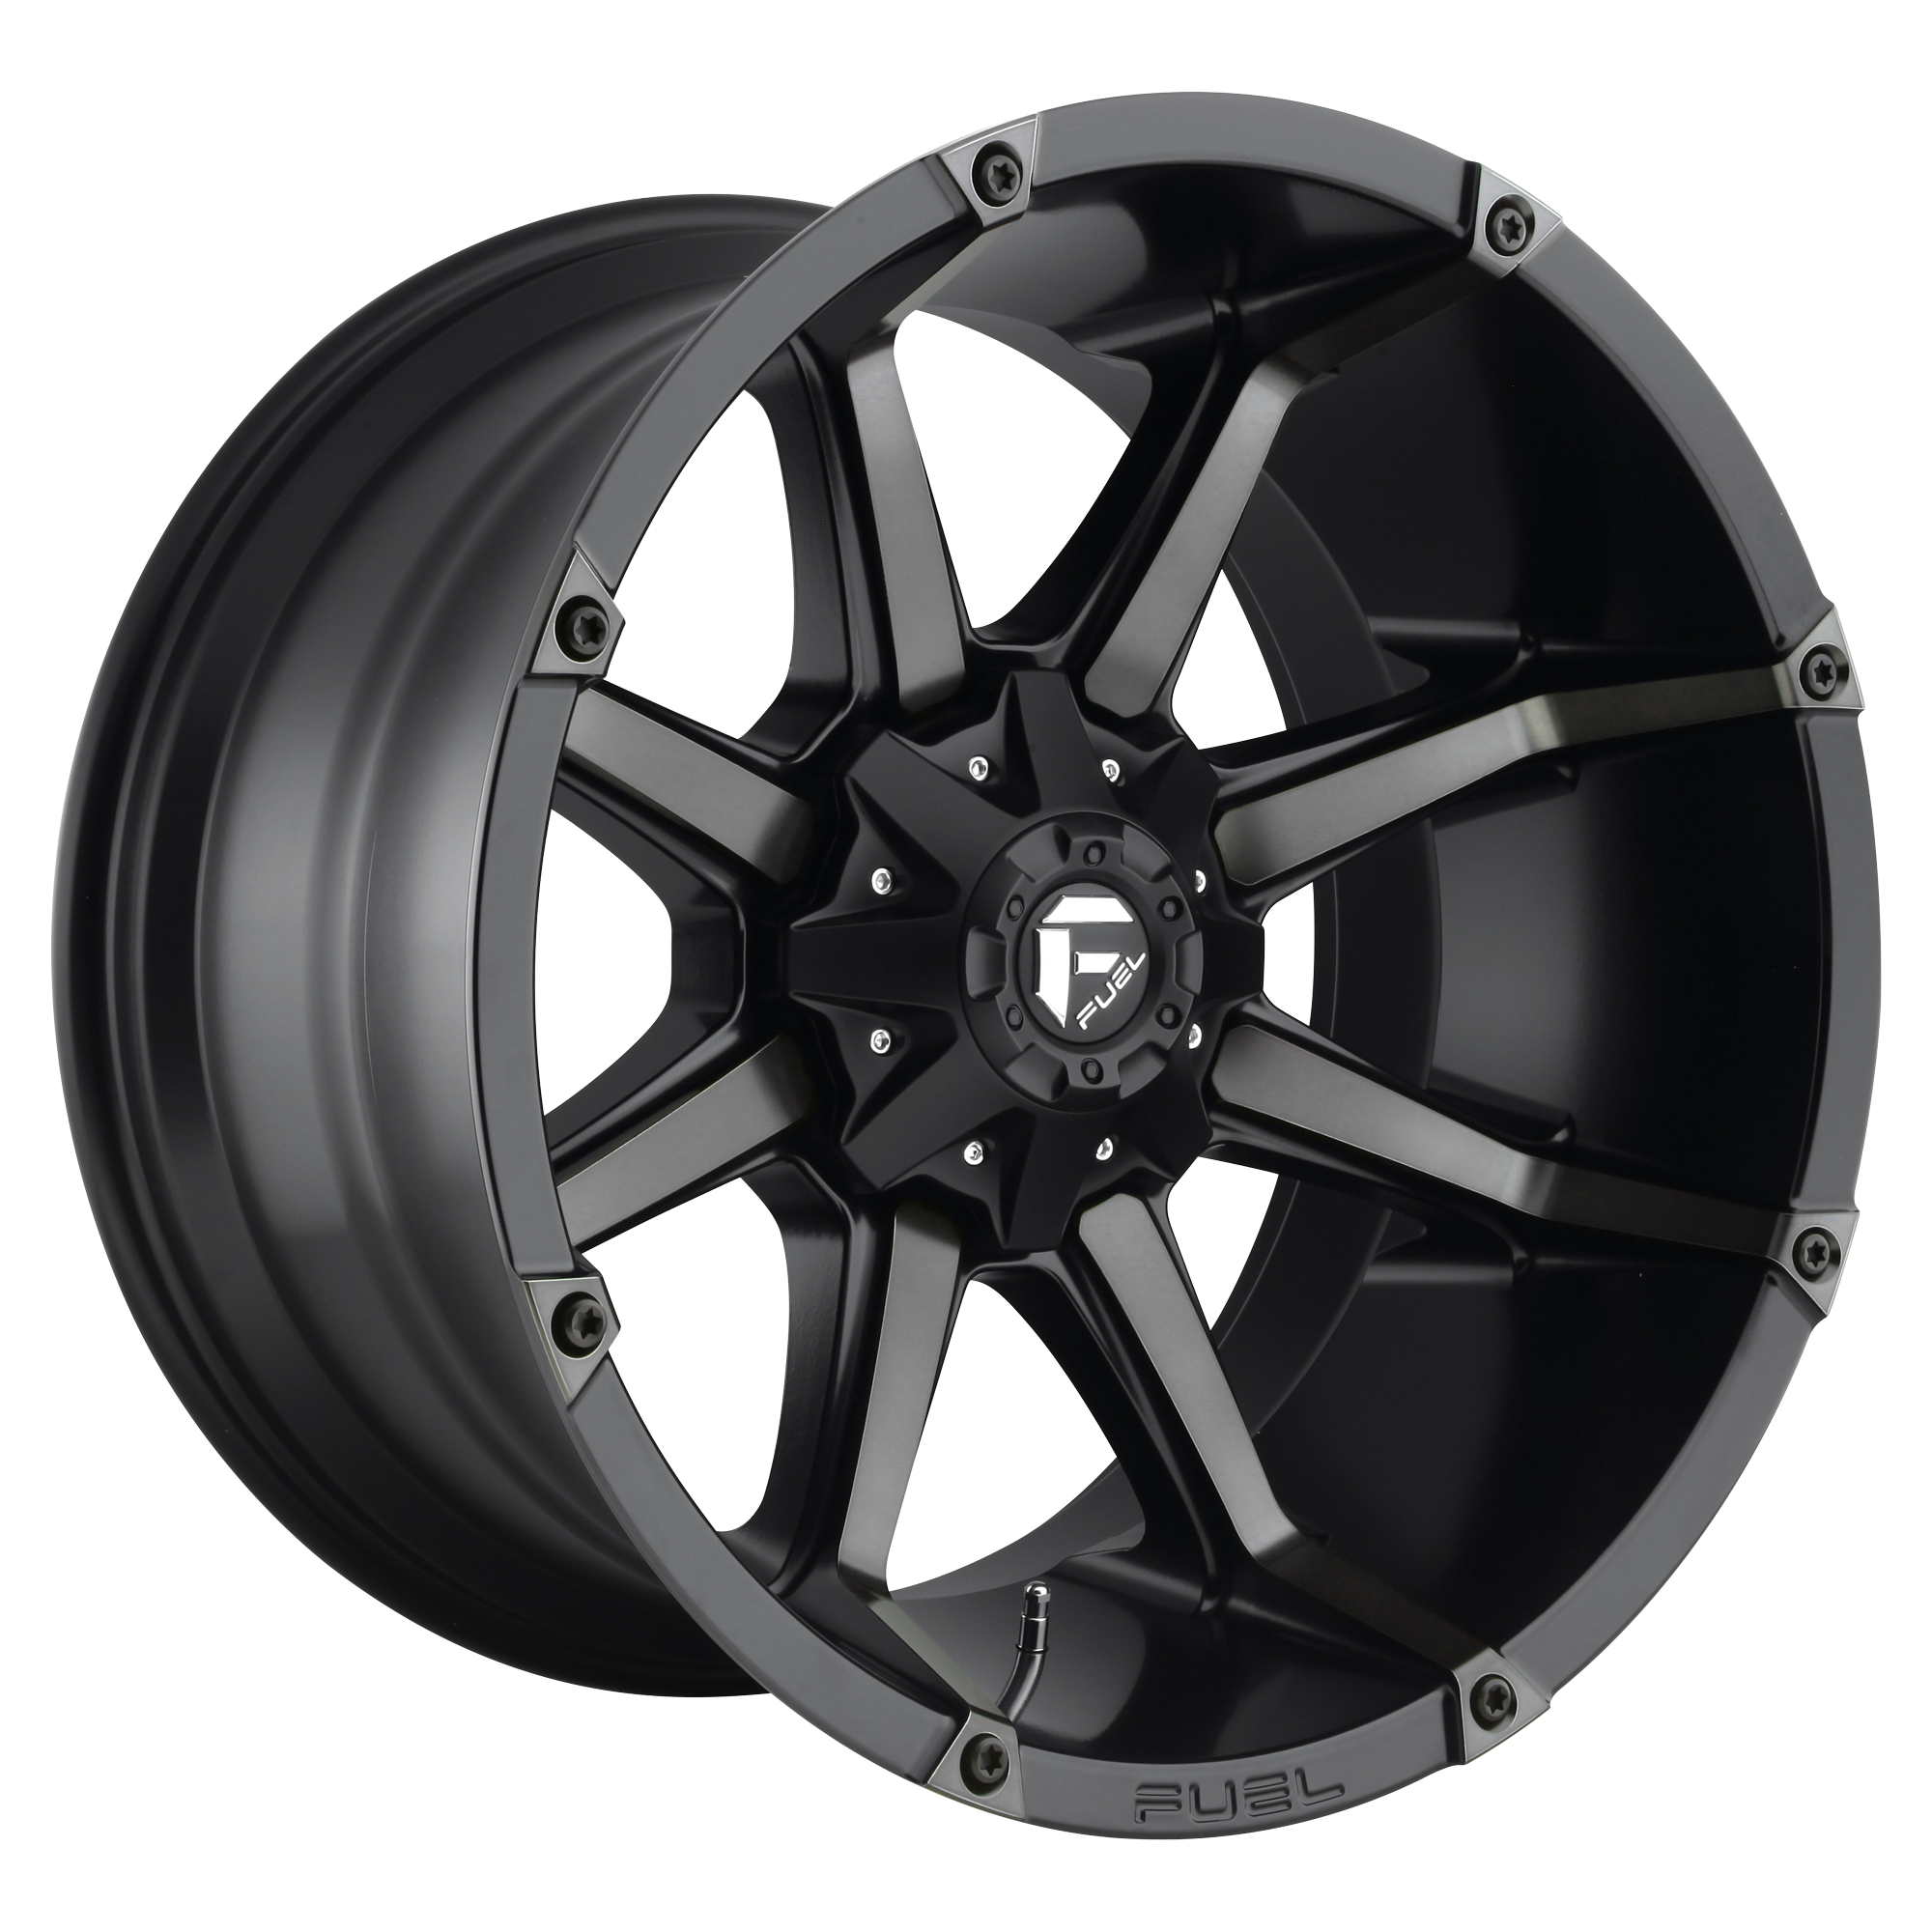 COUPLER 20x9 8x170.00 MATTE BLACK DOUBLE DARK TINT (20 mm) - Tires and Engine Performance